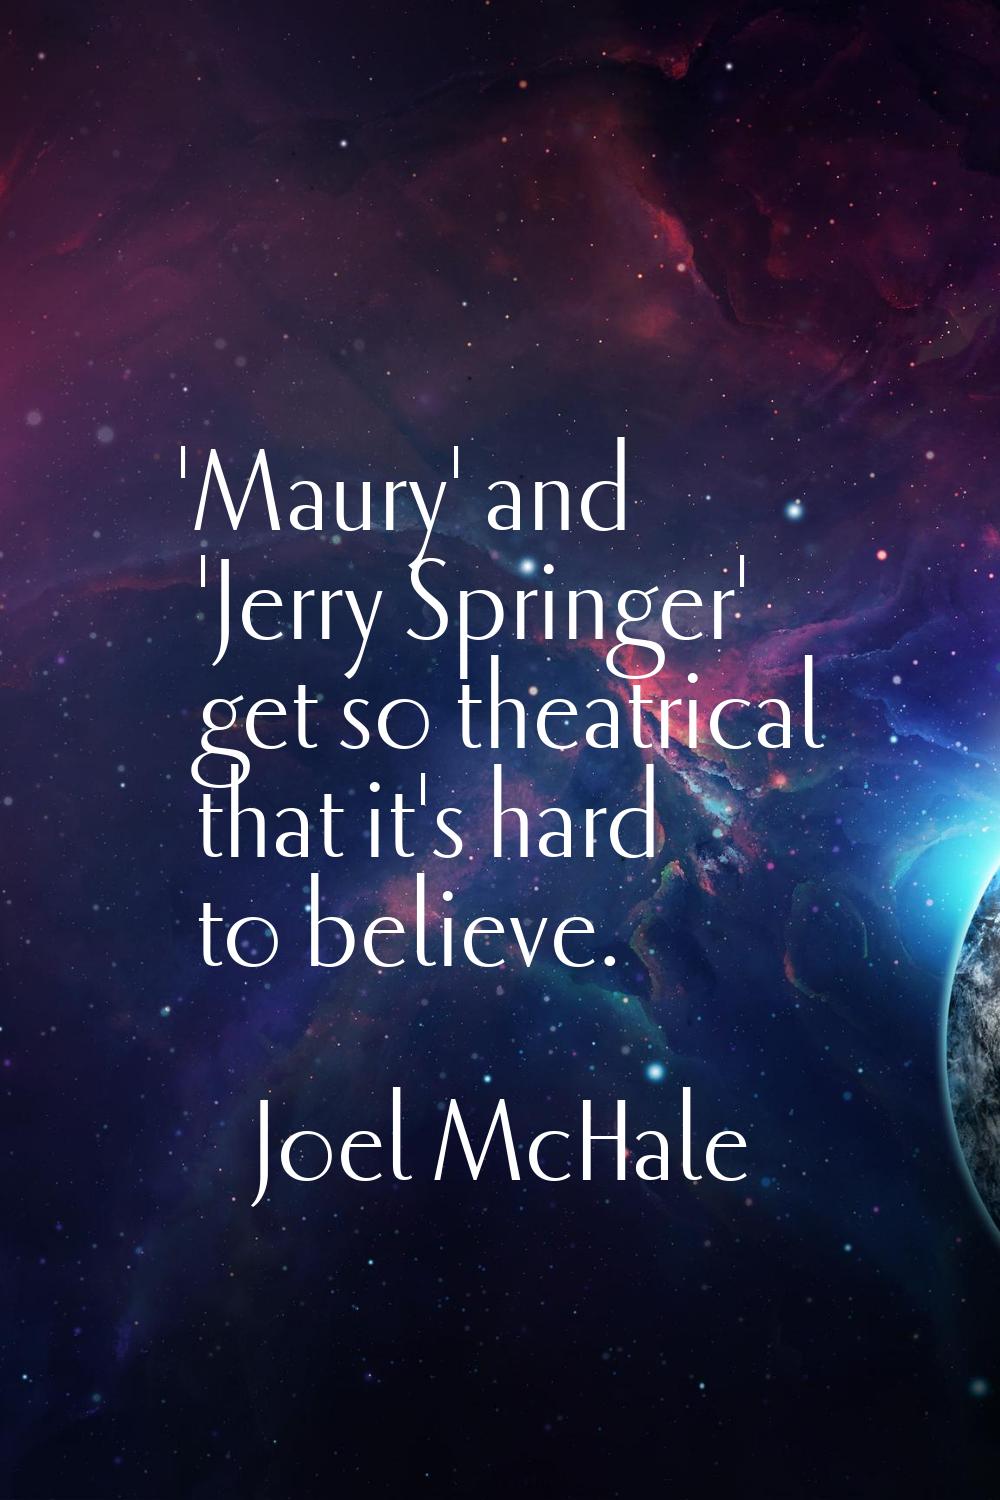 'Maury' and 'Jerry Springer' get so theatrical that it's hard to believe.